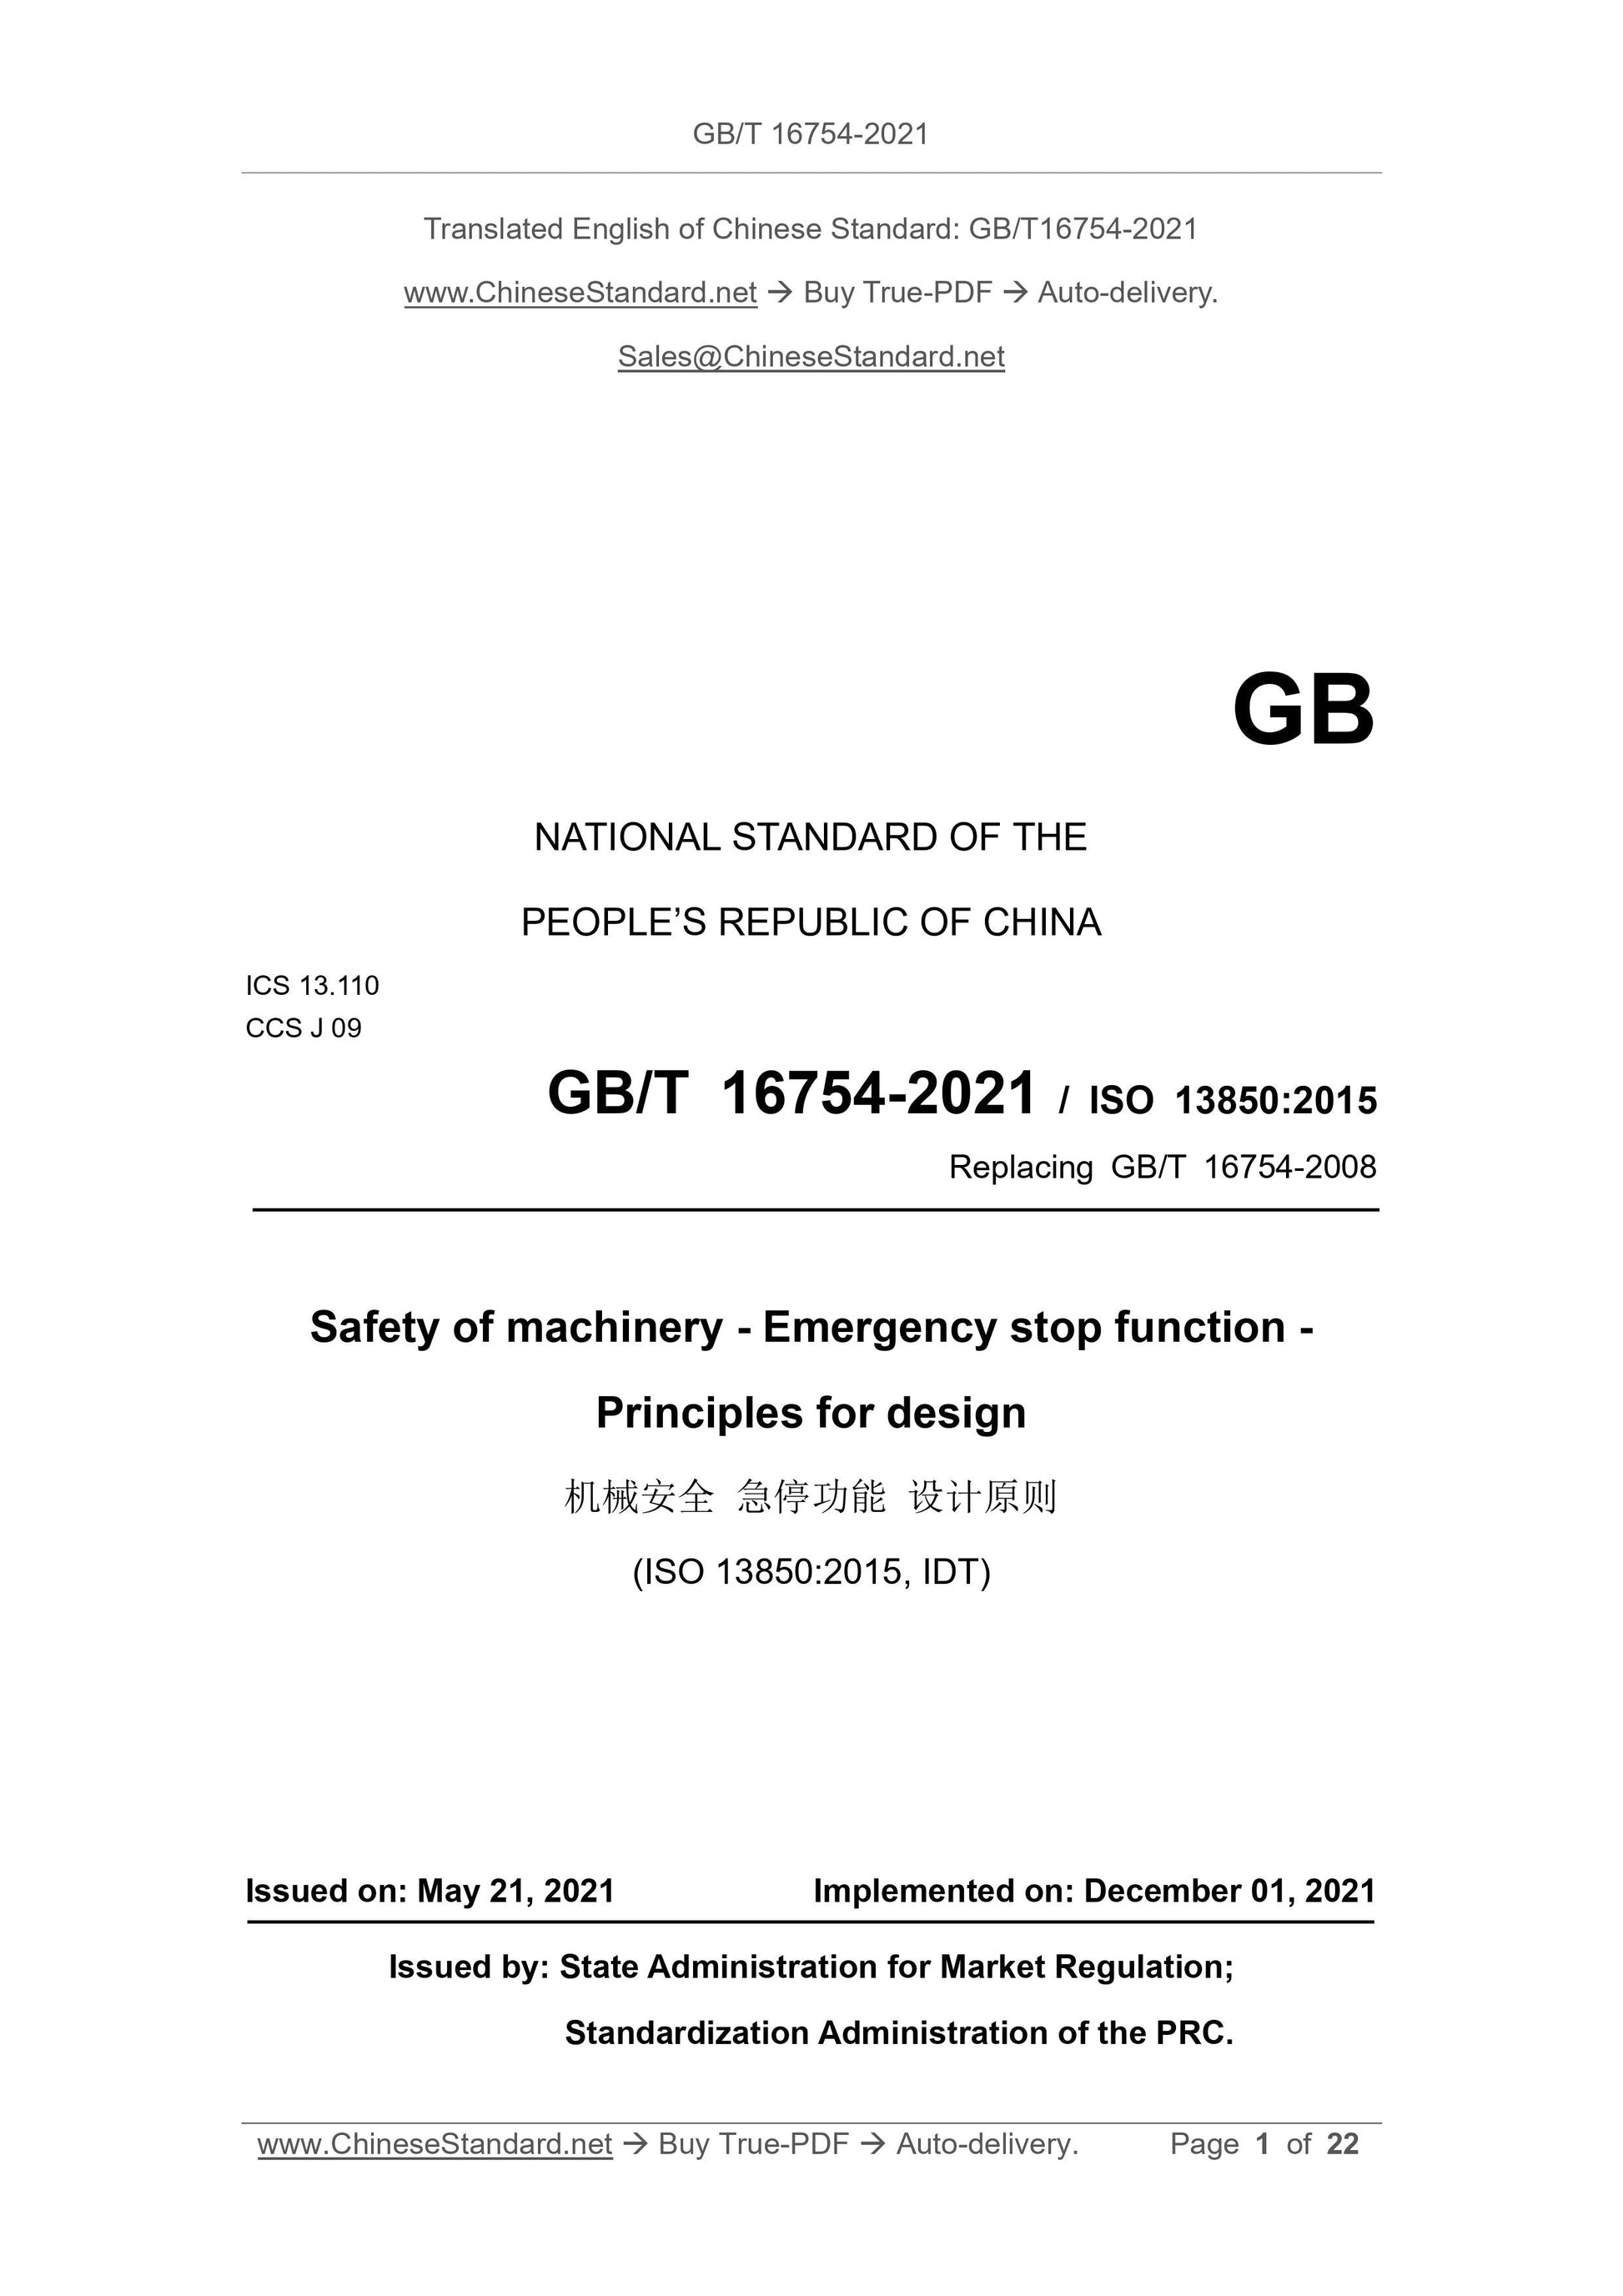 GB/T 16754-2021 Page 1